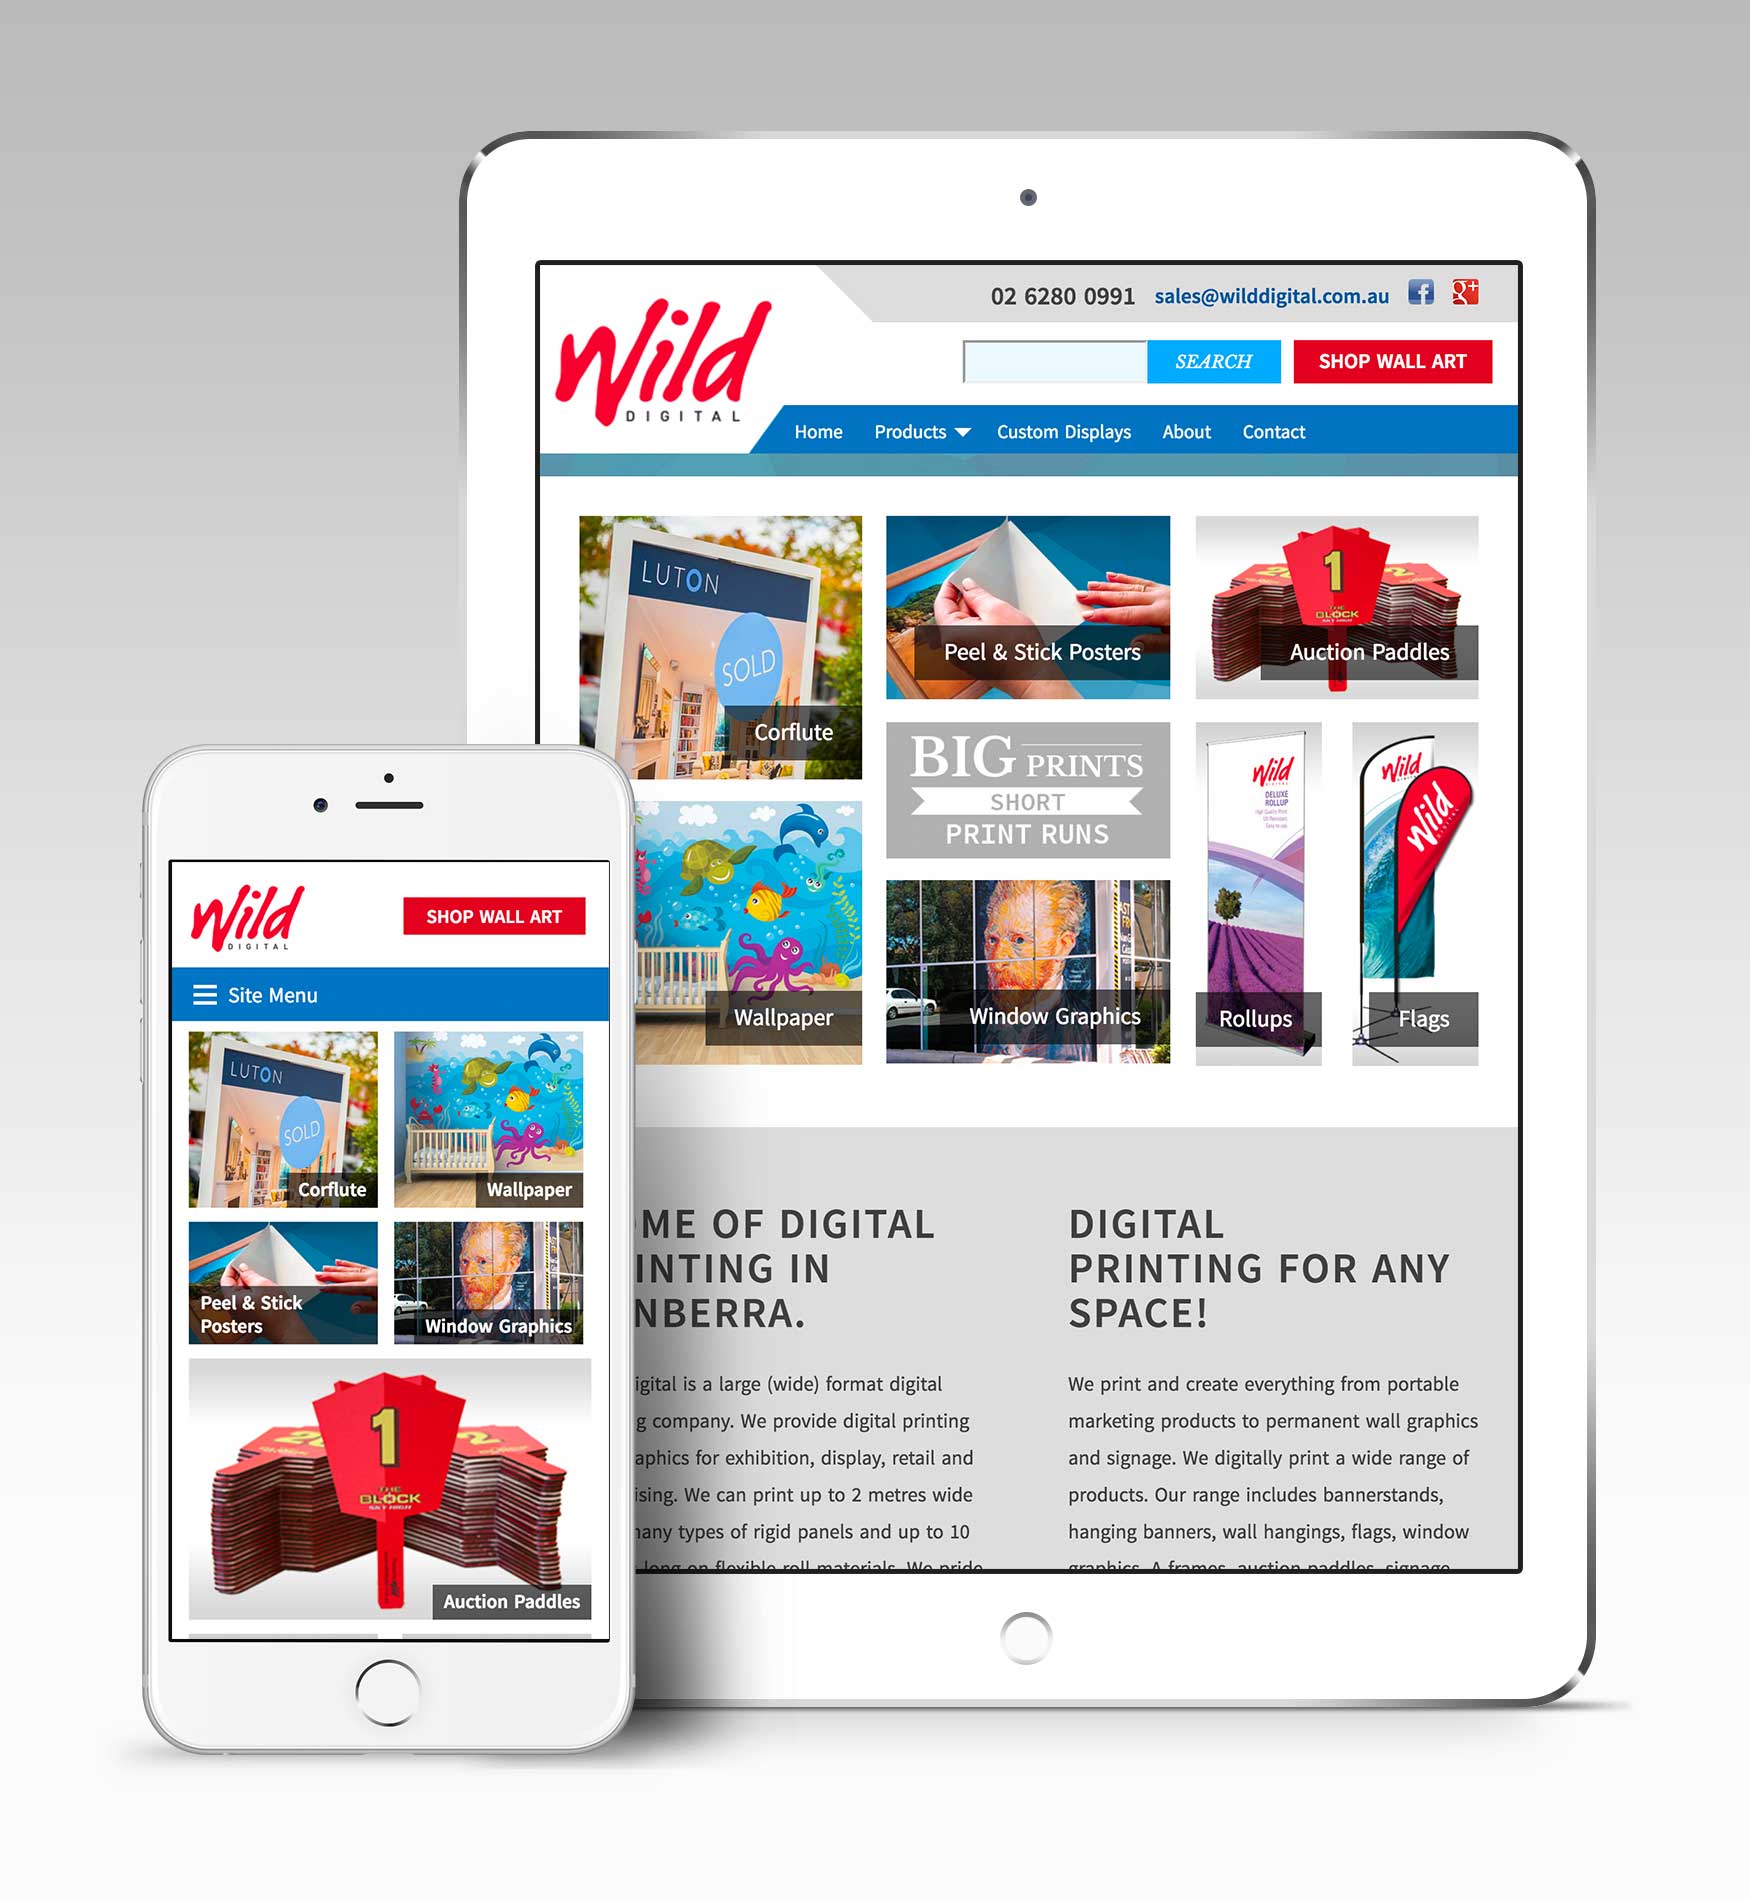 Mobile and ipad showing the Wild Digital home page